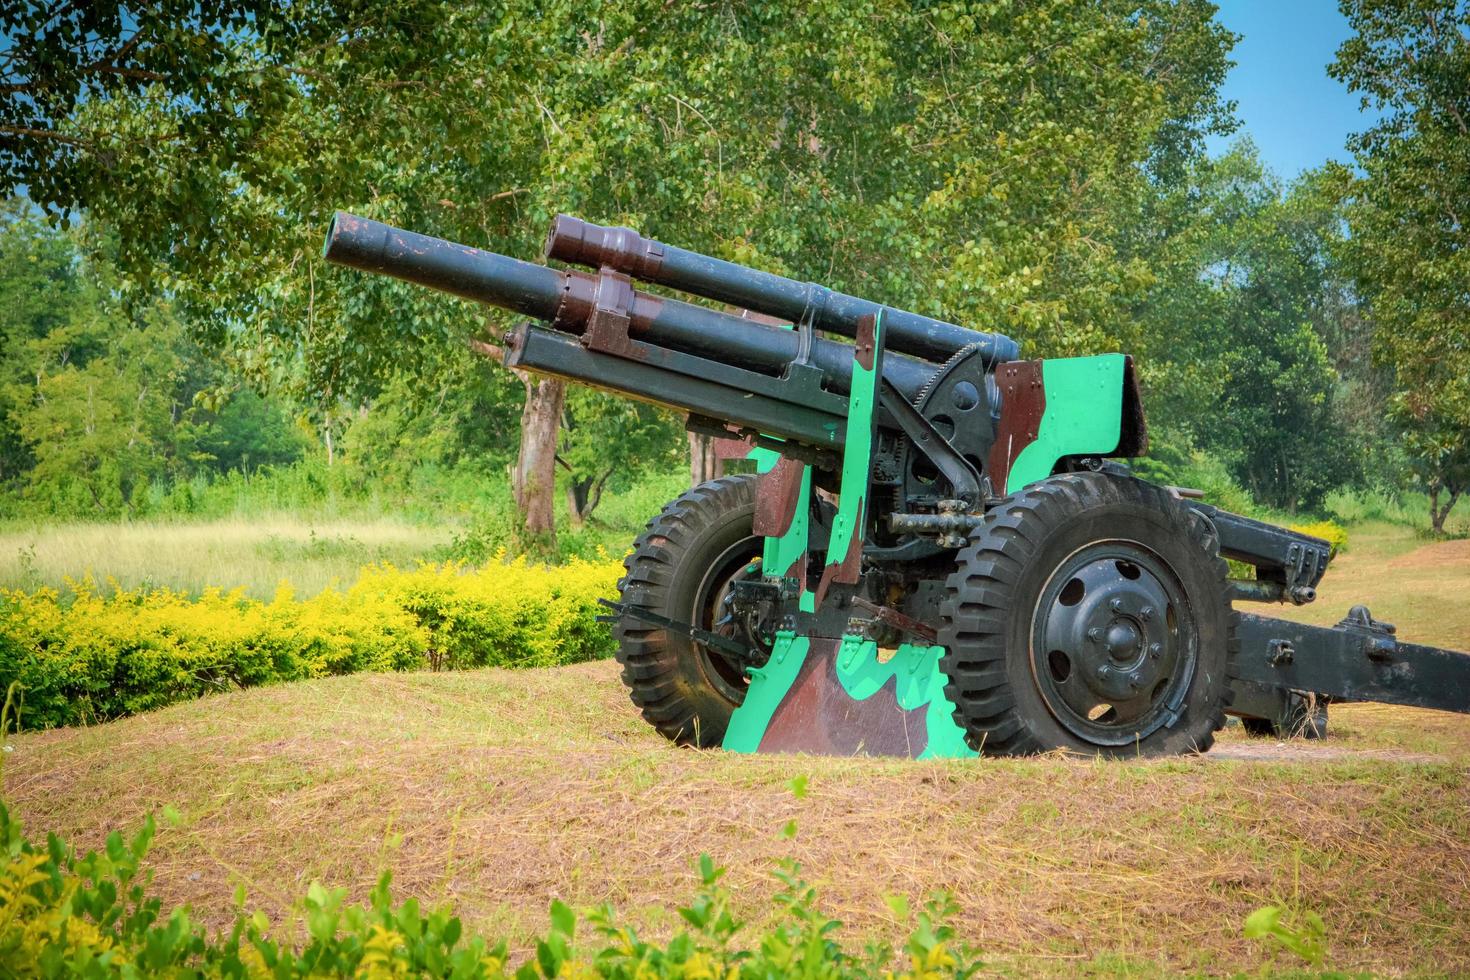 Old artillery cannon gun camouflage pattern ordnance for soldier warrior in the world war in the park photo